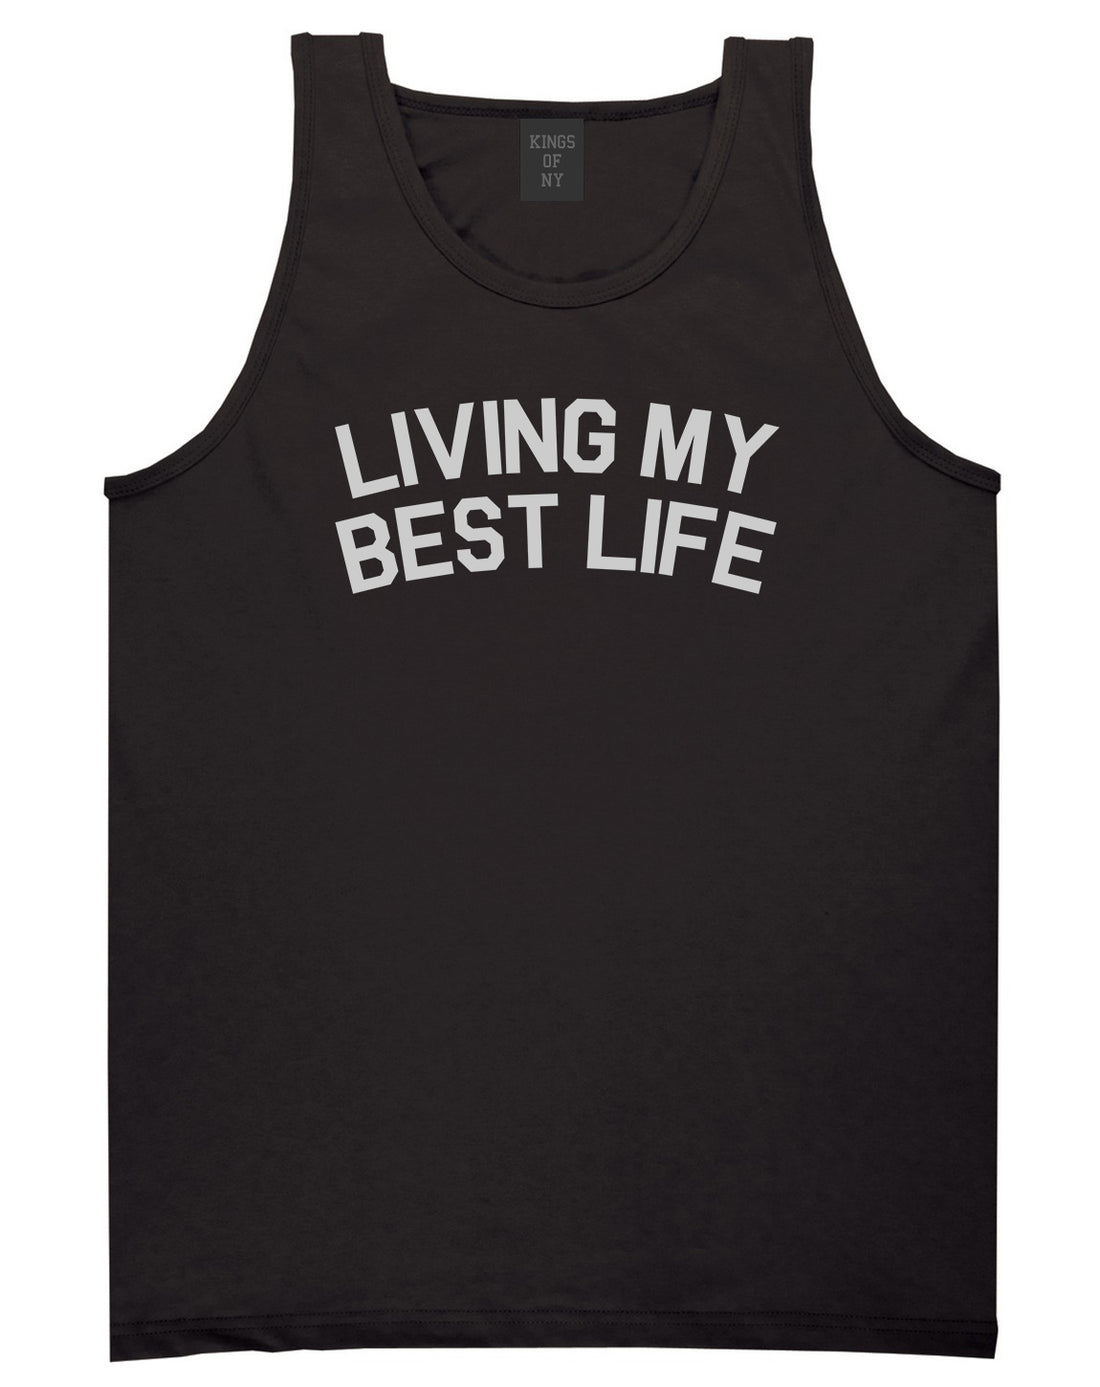 Living My Best Life Mens Tank Top Shirt Black by Kings Of NY